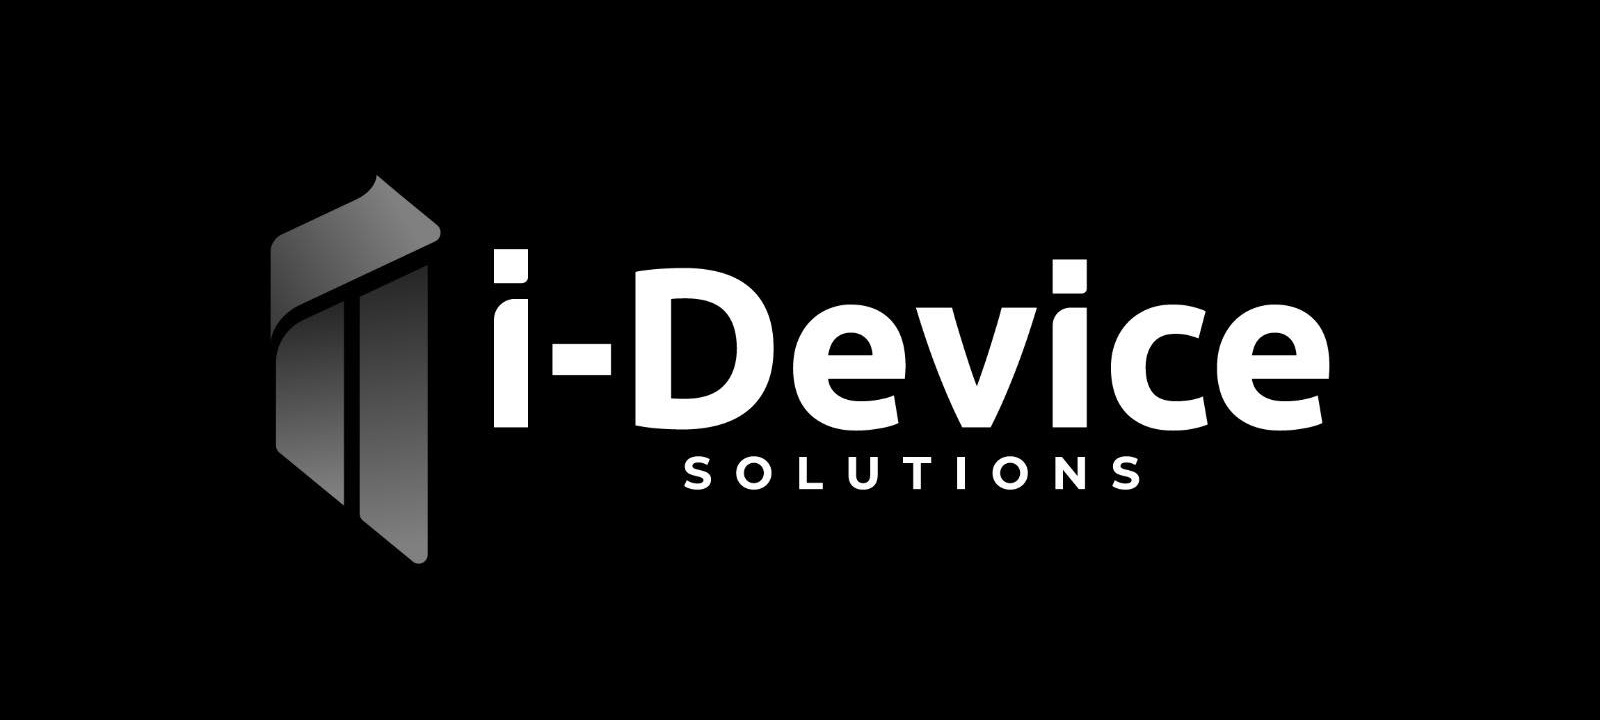 iDevice Solution